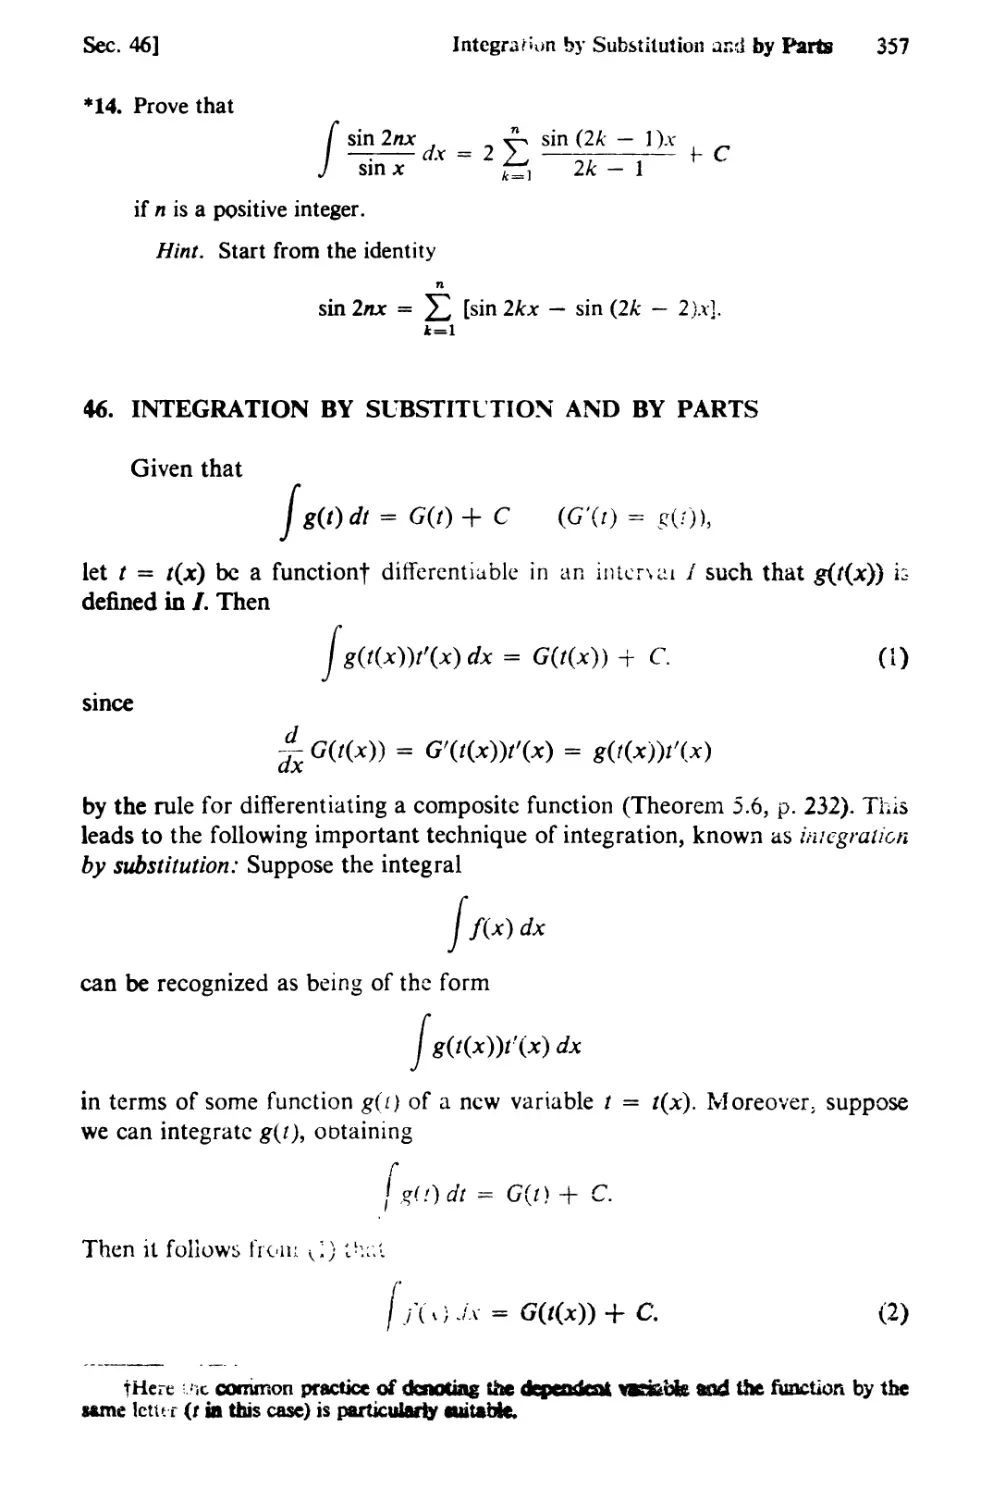 46. Integration by Substitution and by Parts